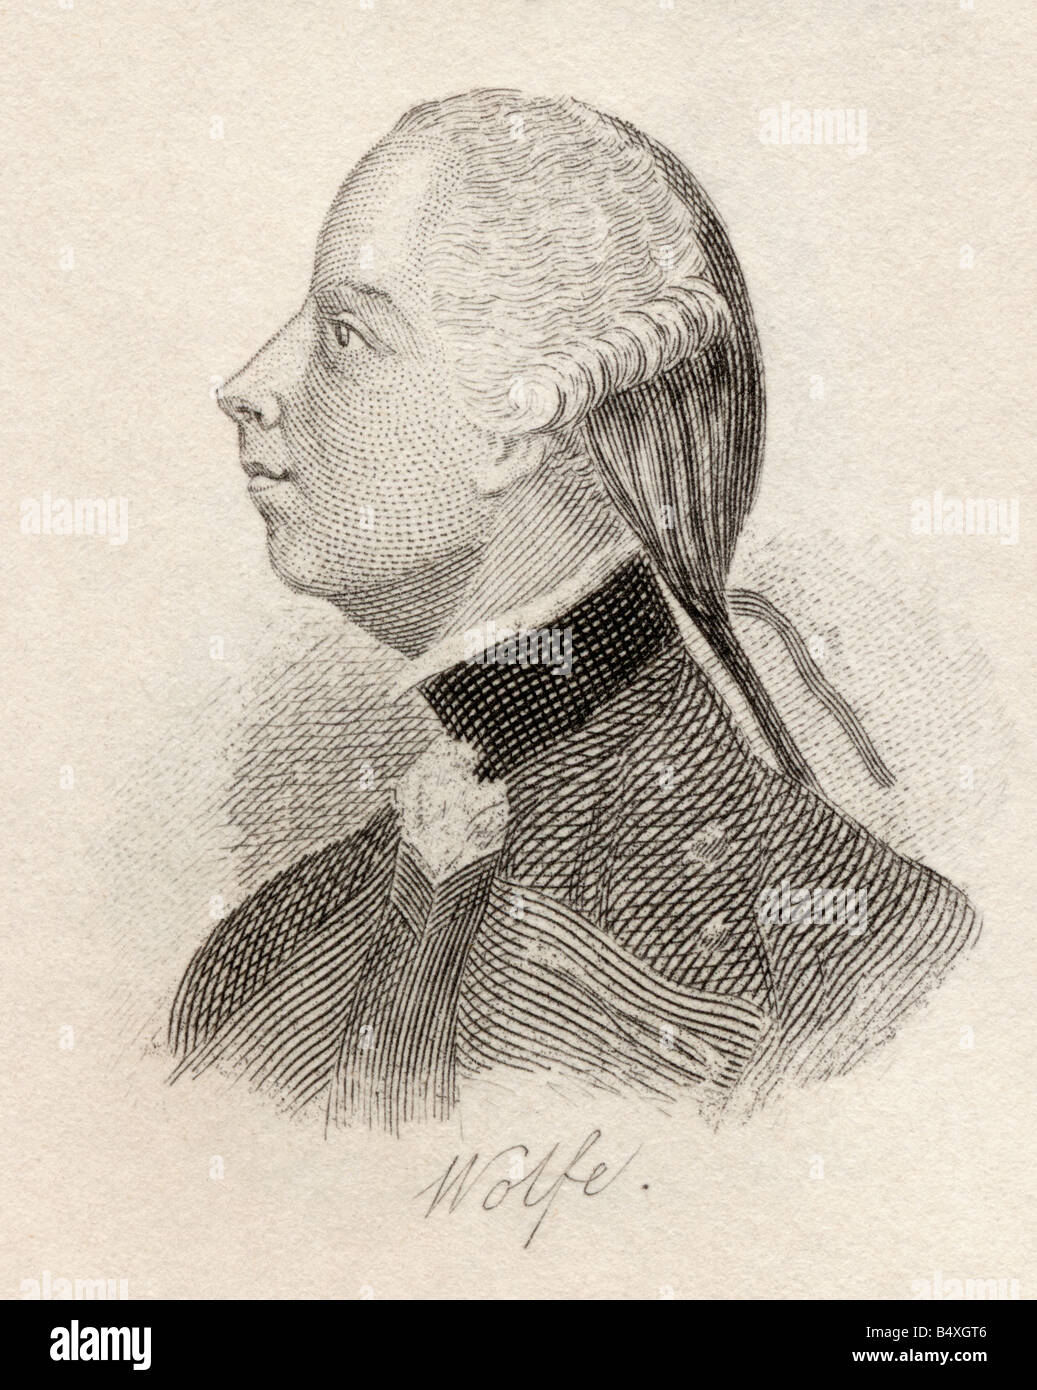 General James Wolfe, 1727 - 1759. British army officer and general. From the book Crabbs Historical Dictionary, published 1825. Stock Photo